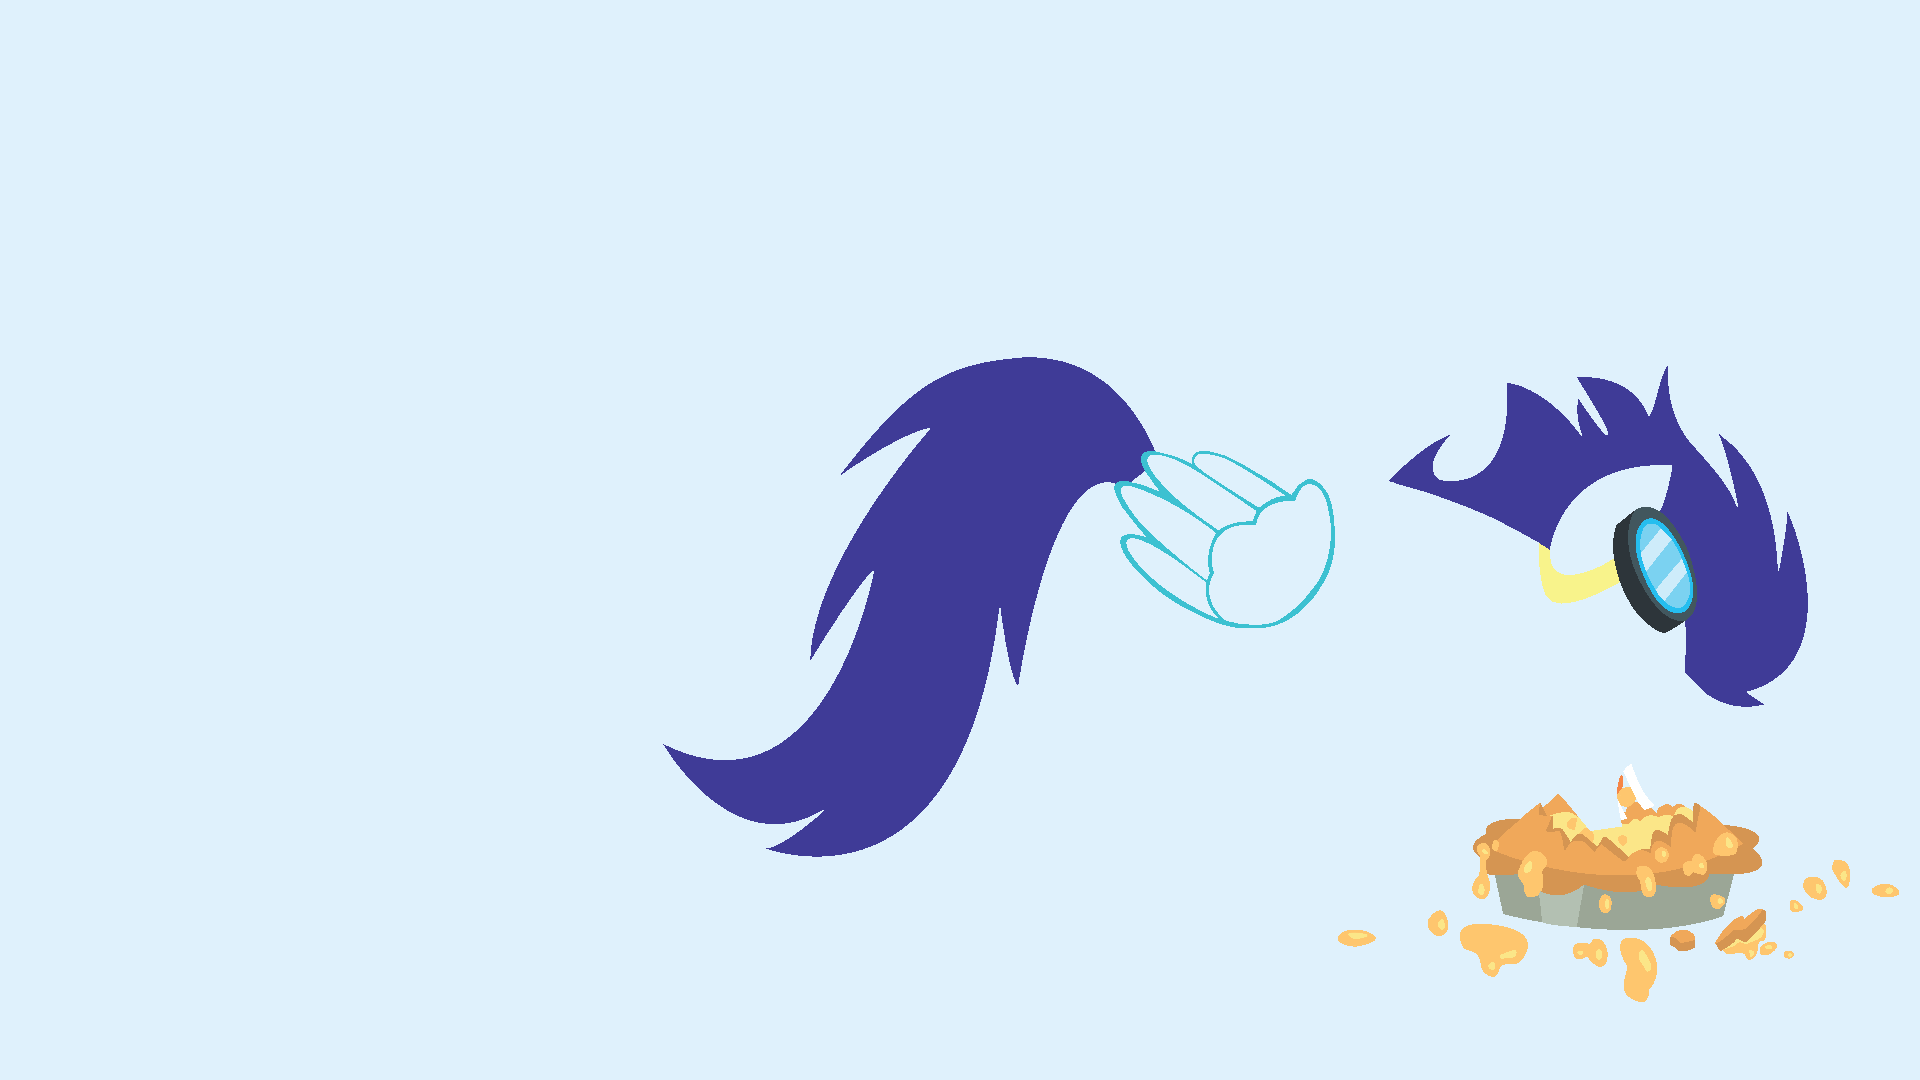 Soarin' Minimalistic Wallpaper by Kitana-Coldfire and TheRarestSpitfyre